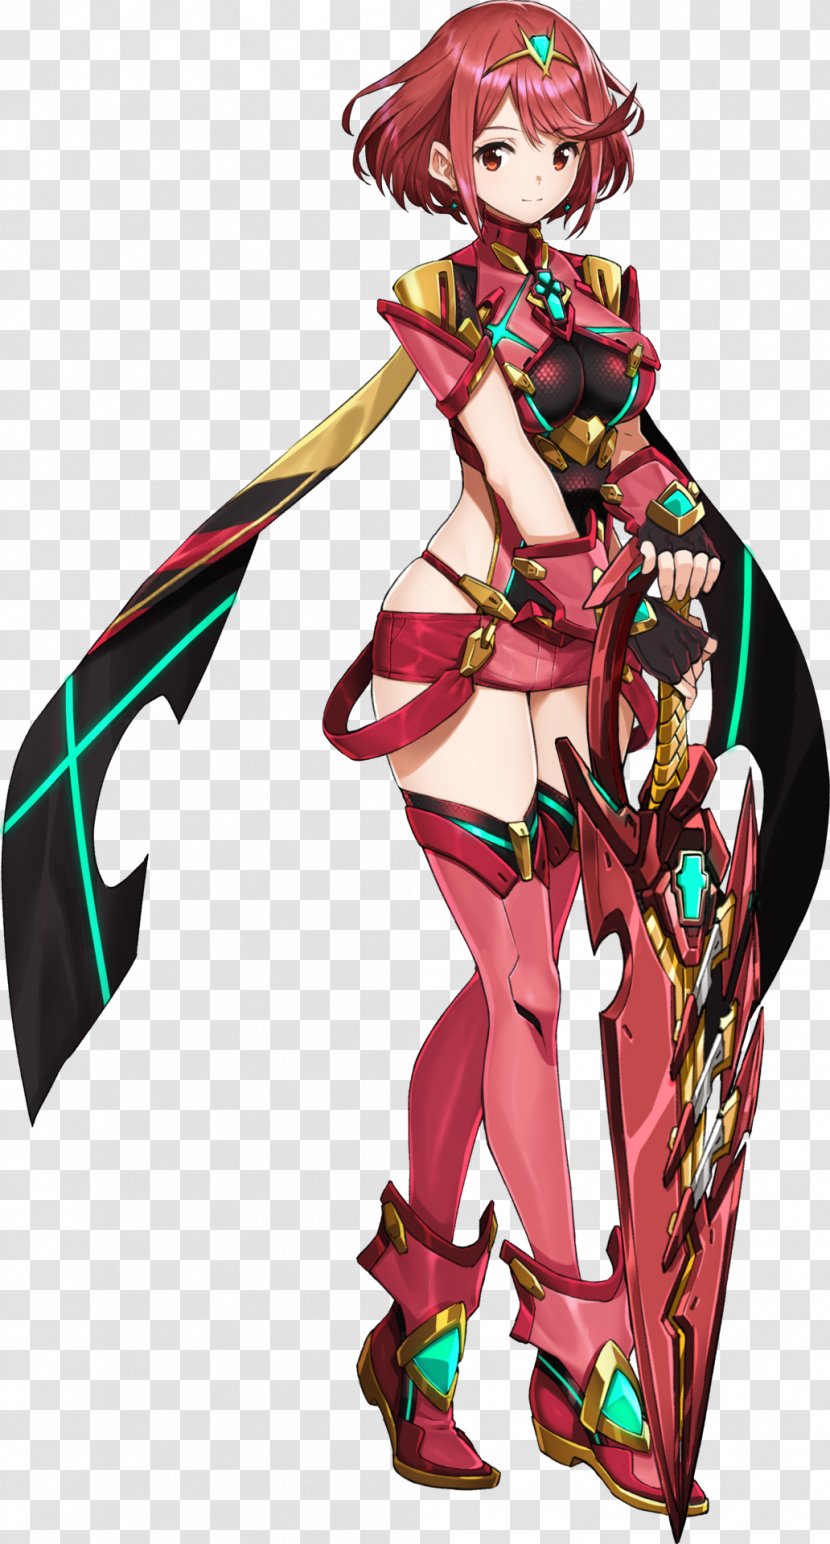 Xenoblade Chronicles 2 Wii U - Flower Transparent PNG